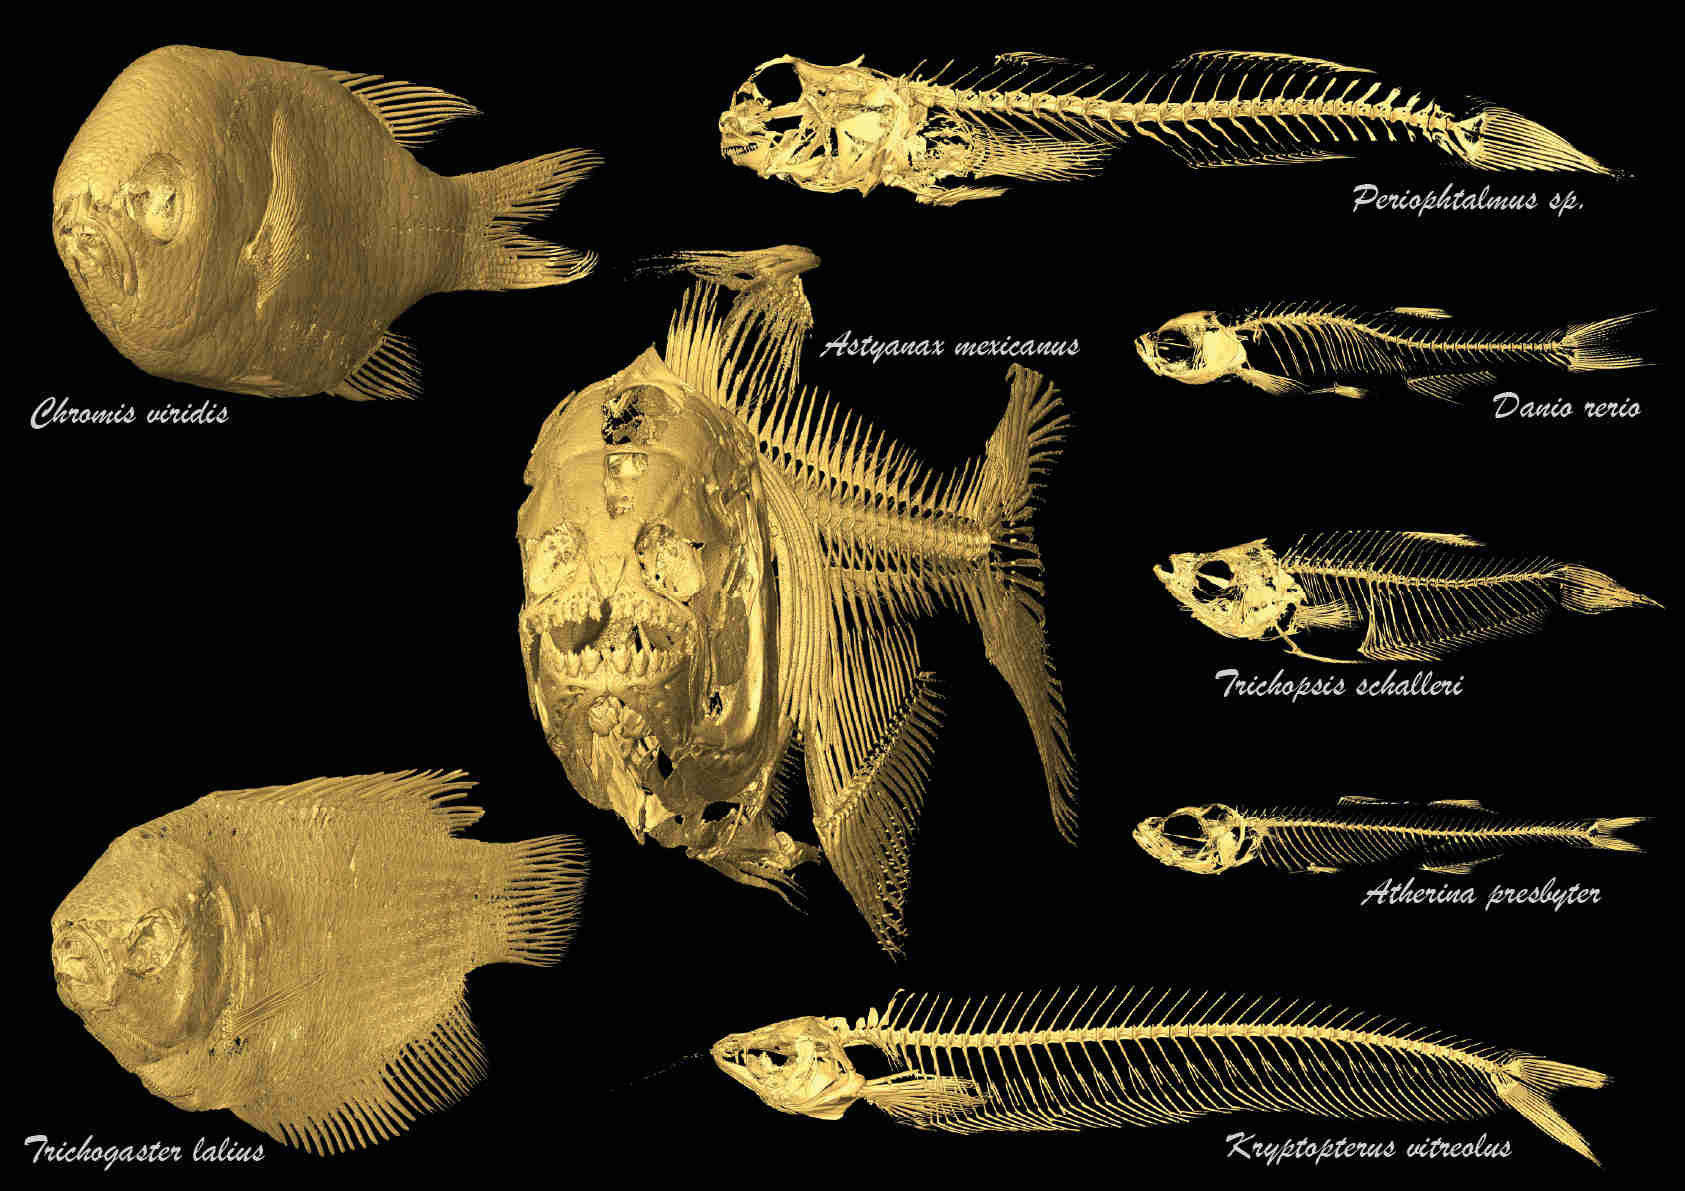 CT scans of fishes